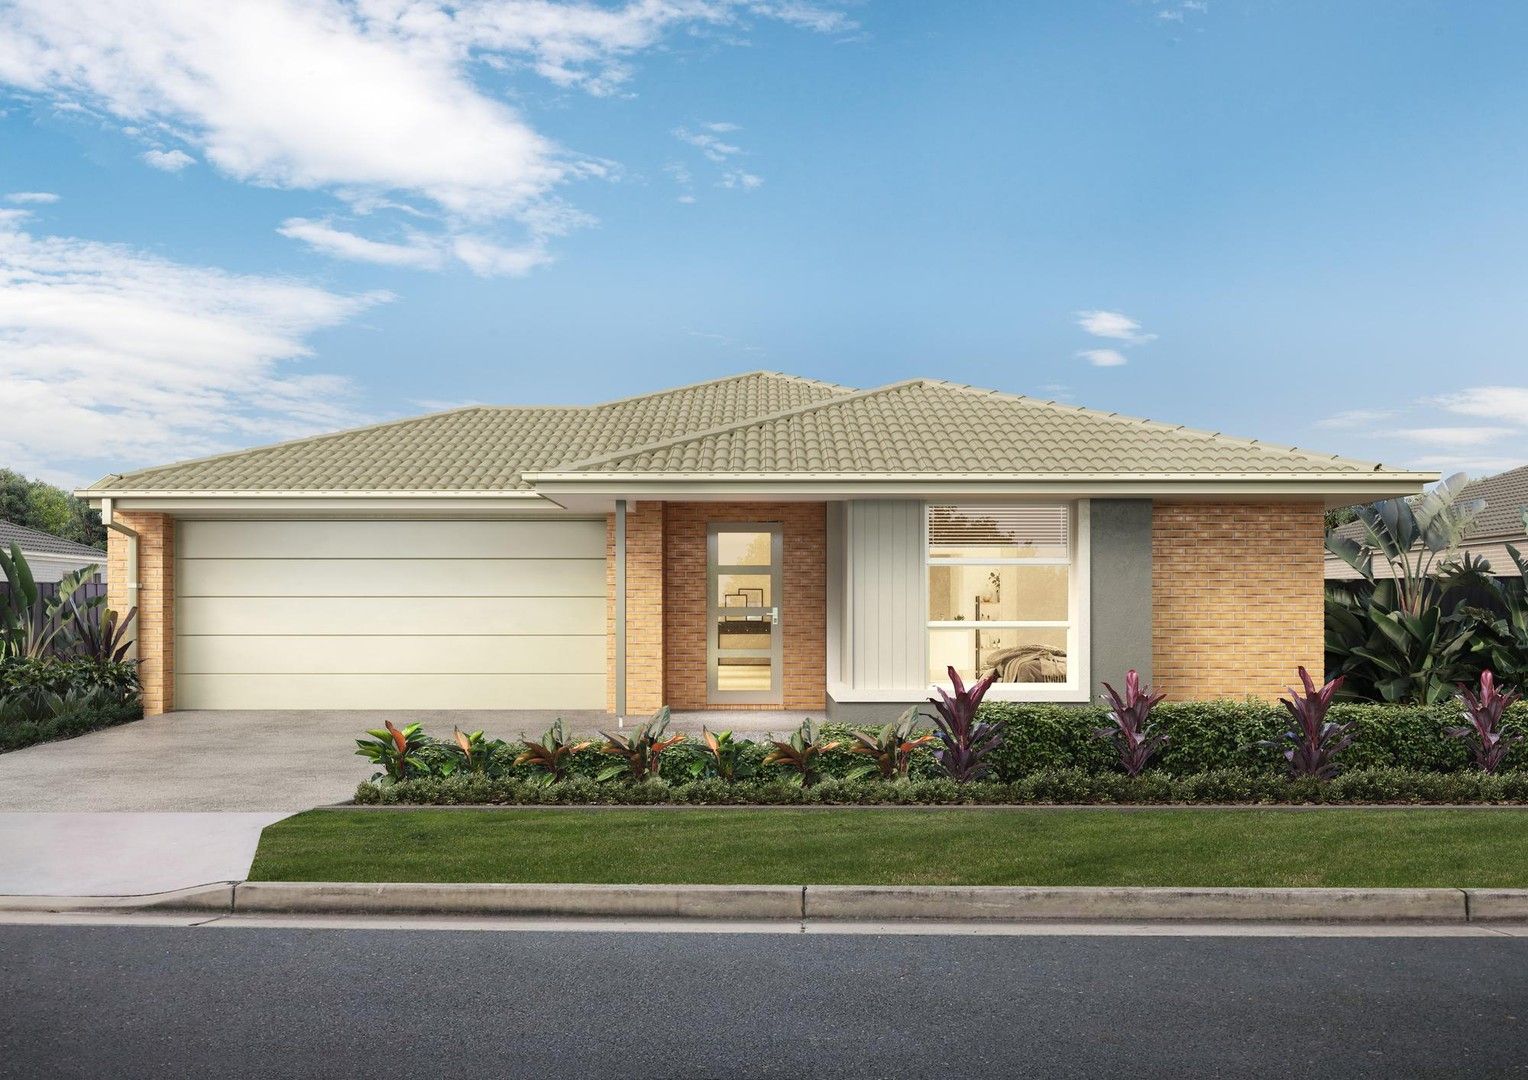 4 bedrooms New House & Land in 3186 Lavant Street SEAFORD HEIGHTS SA, 5169